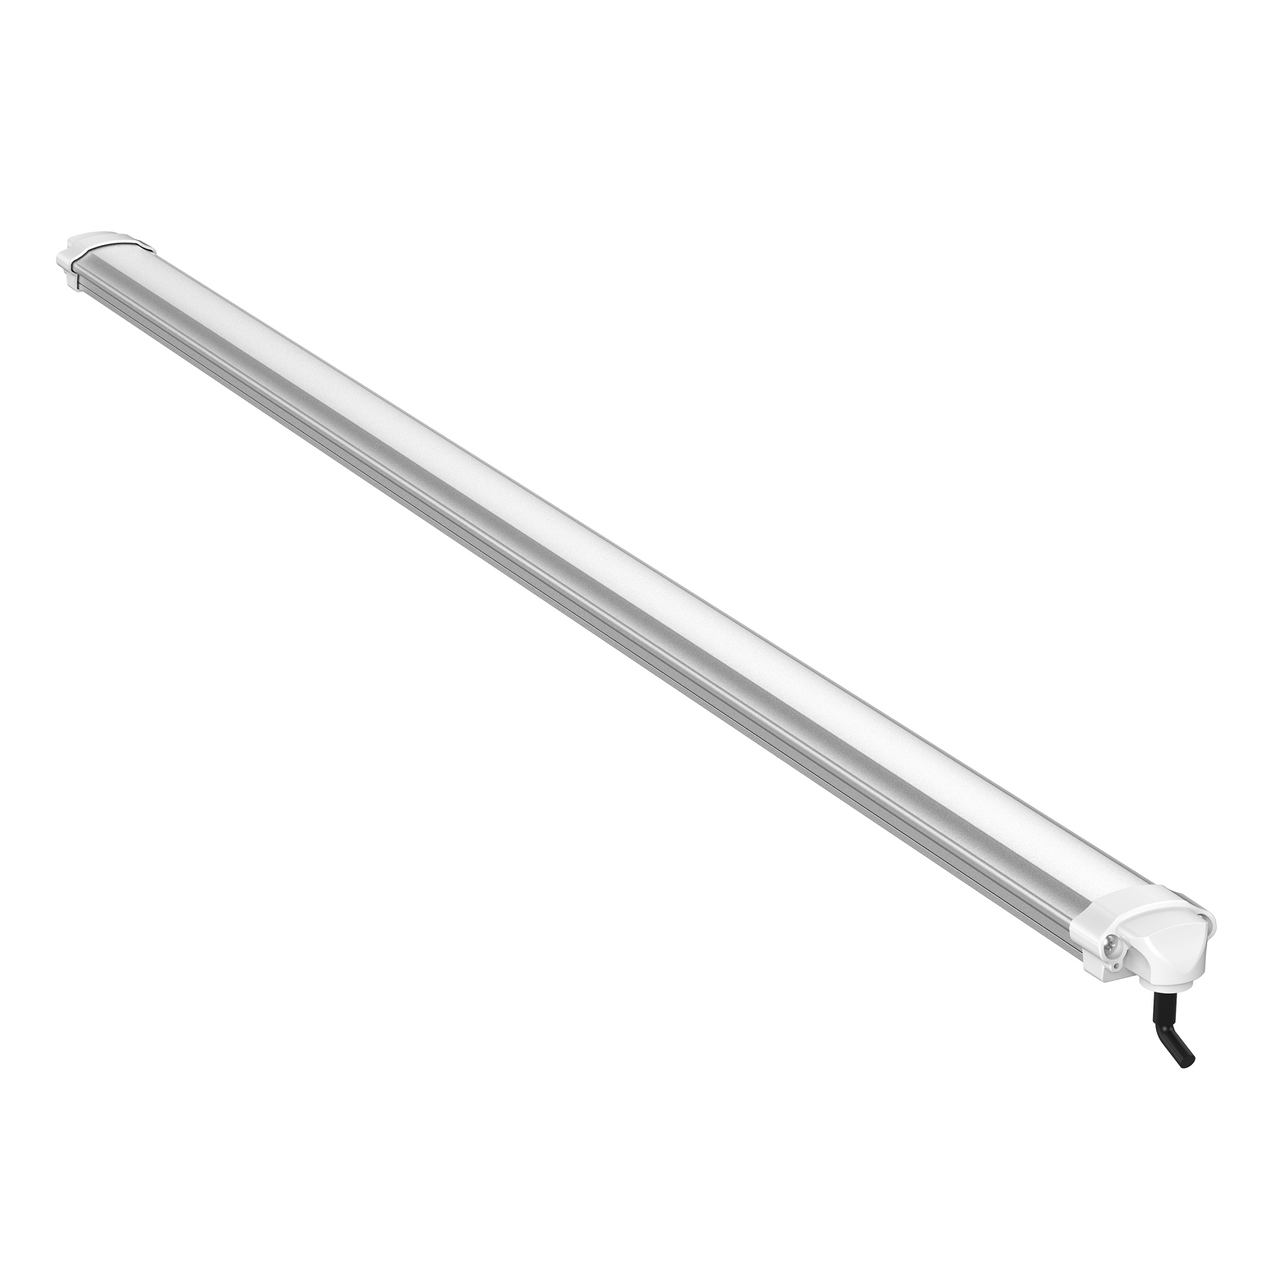 LED Grow Light Bar - Superior Quality for Exceptional Plant Growth